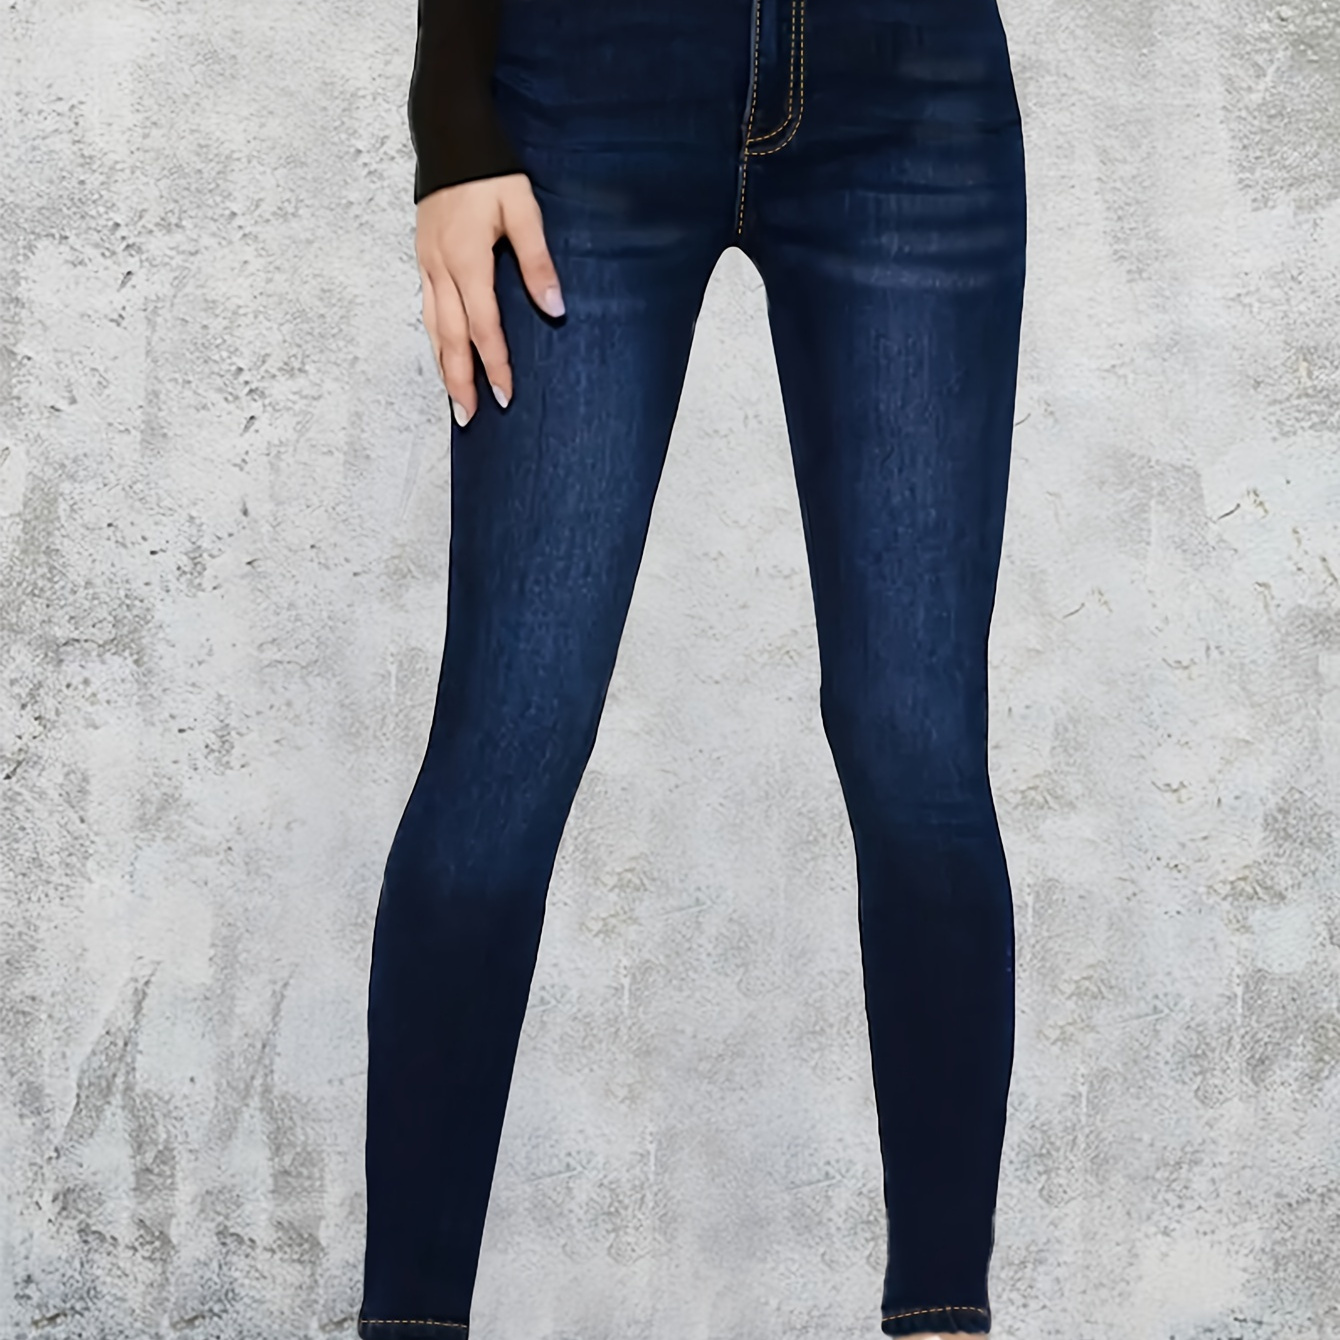 

Women's Elegant High-waisted Skinny Jeans, Stretch Fit Plain Washed Denim, Fashion Versatile Blue, Casual Chic Style Pants